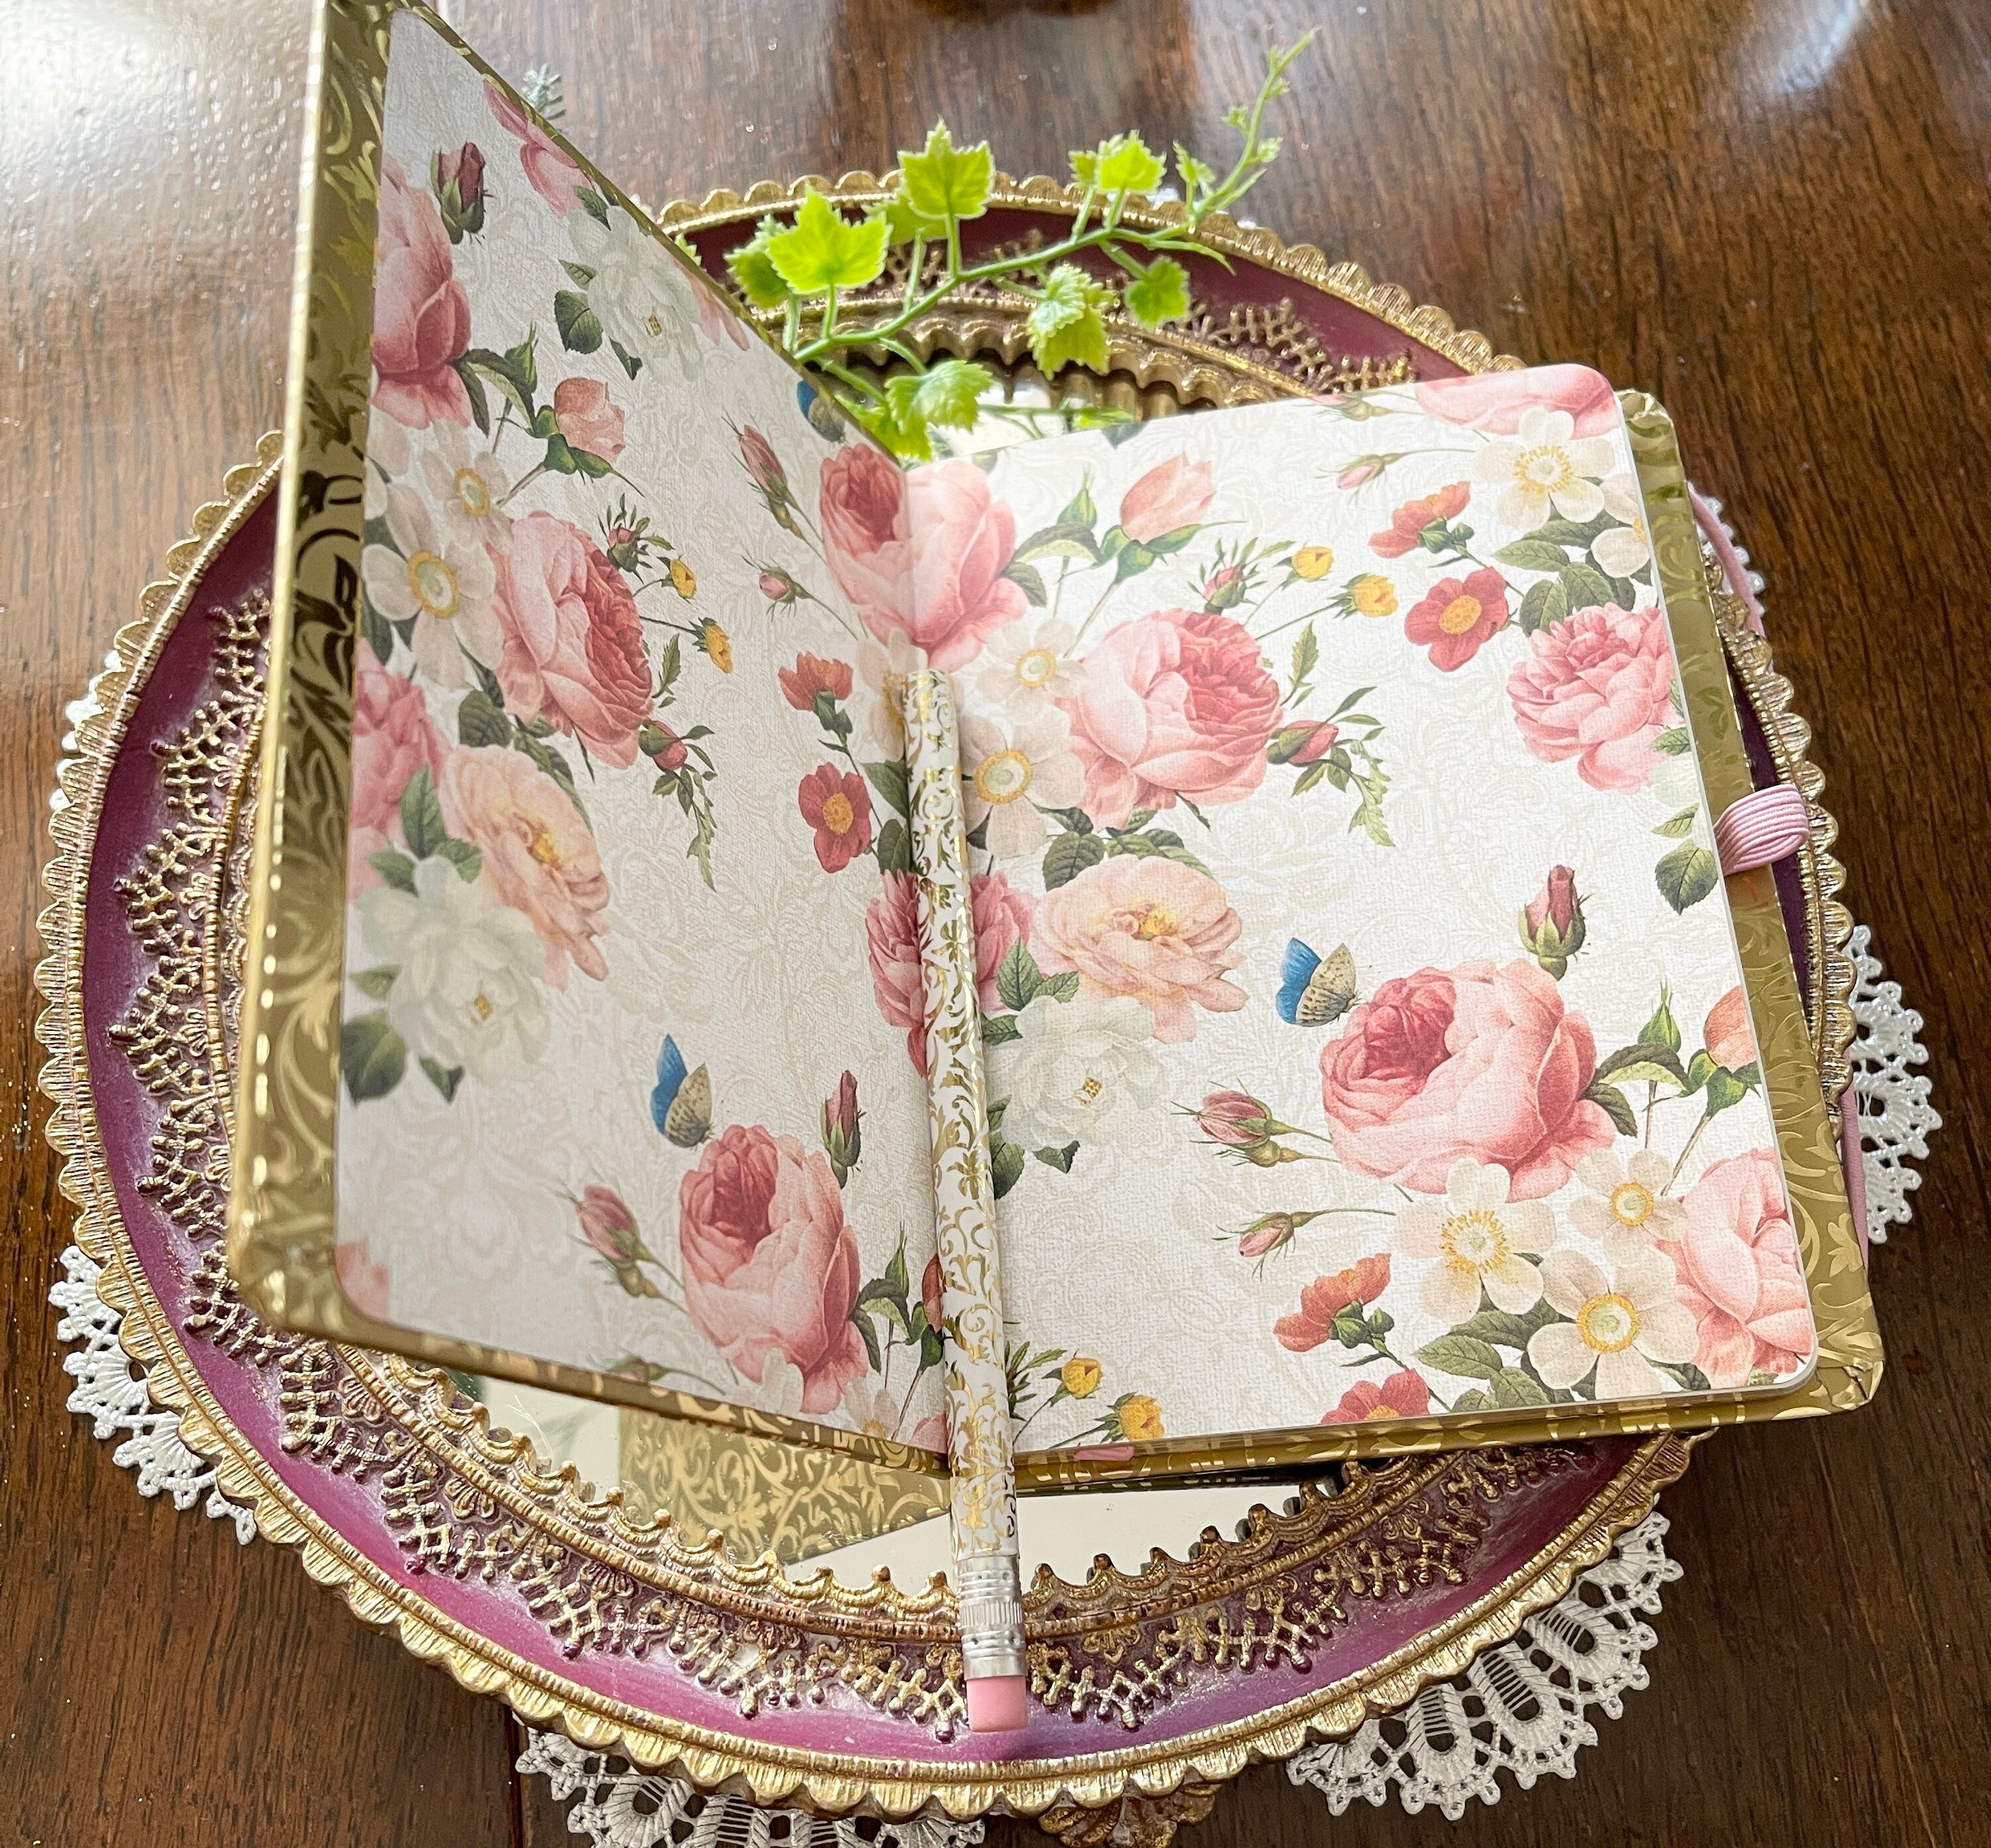 『Royal Palace』ローズノートペンシルセット Rose pocket notebook with pencil